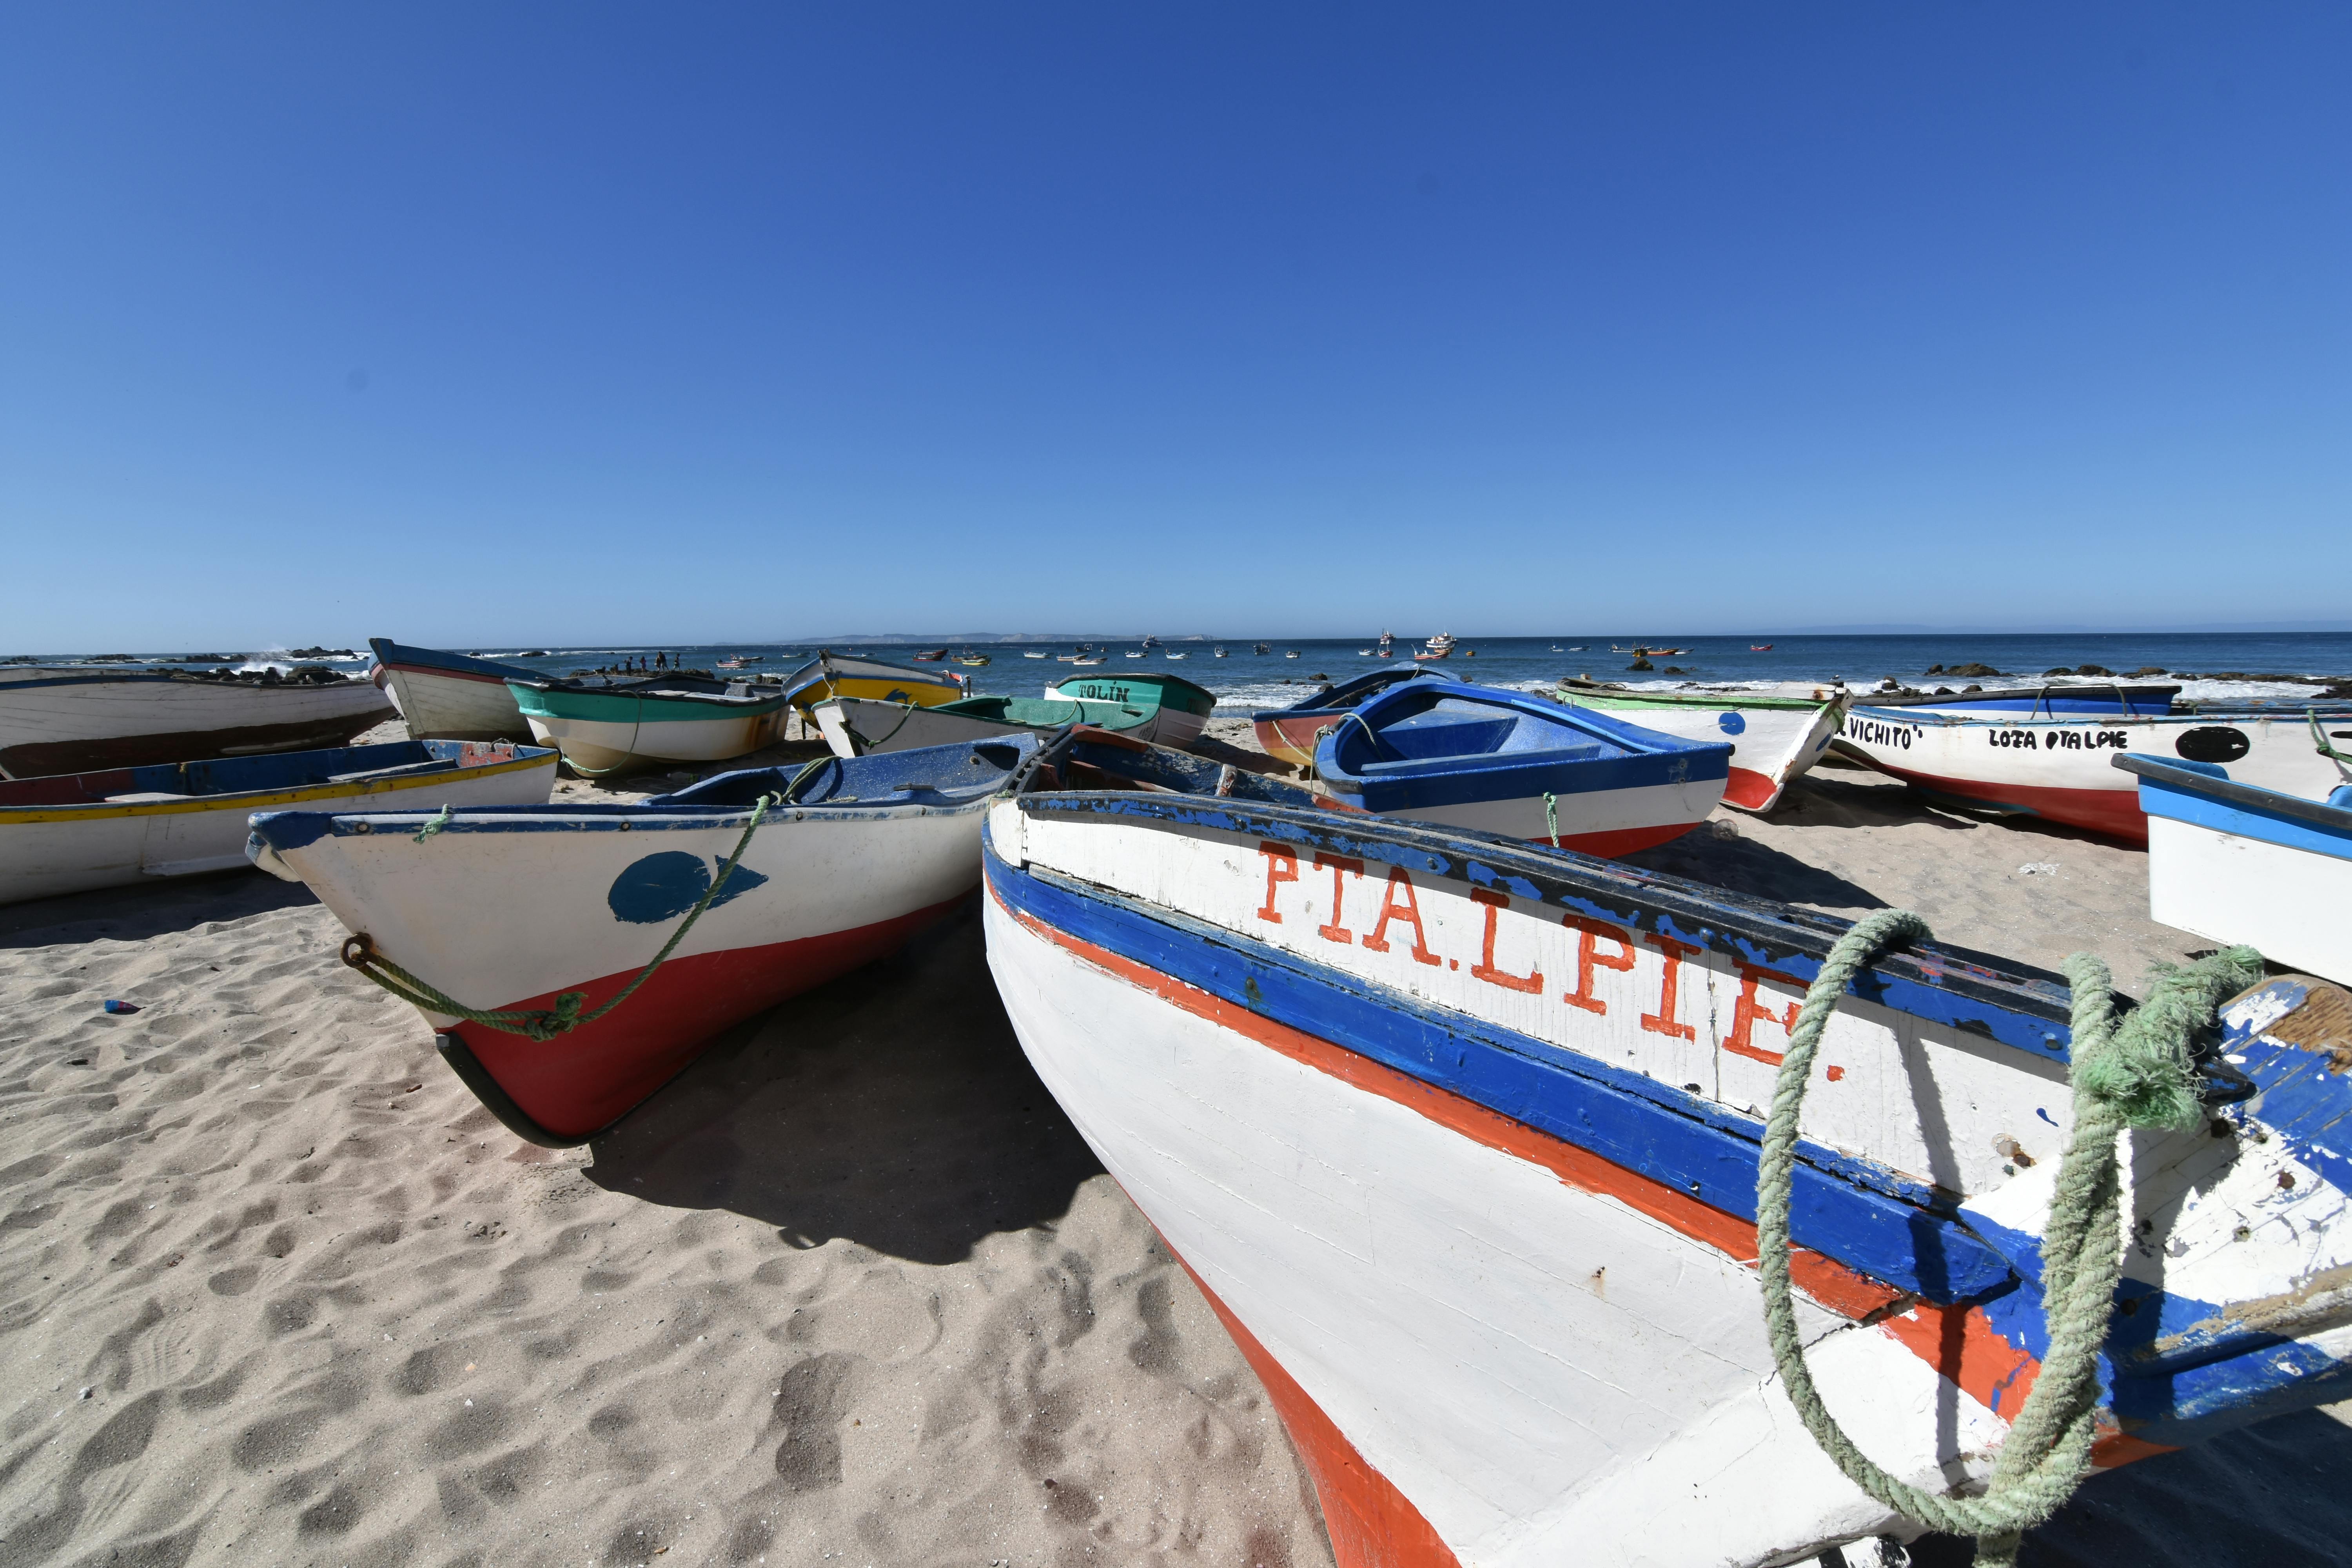 A Policy-Oriented Toolkit for Reducing Illegality in Small-Scale Fisheries in Chile